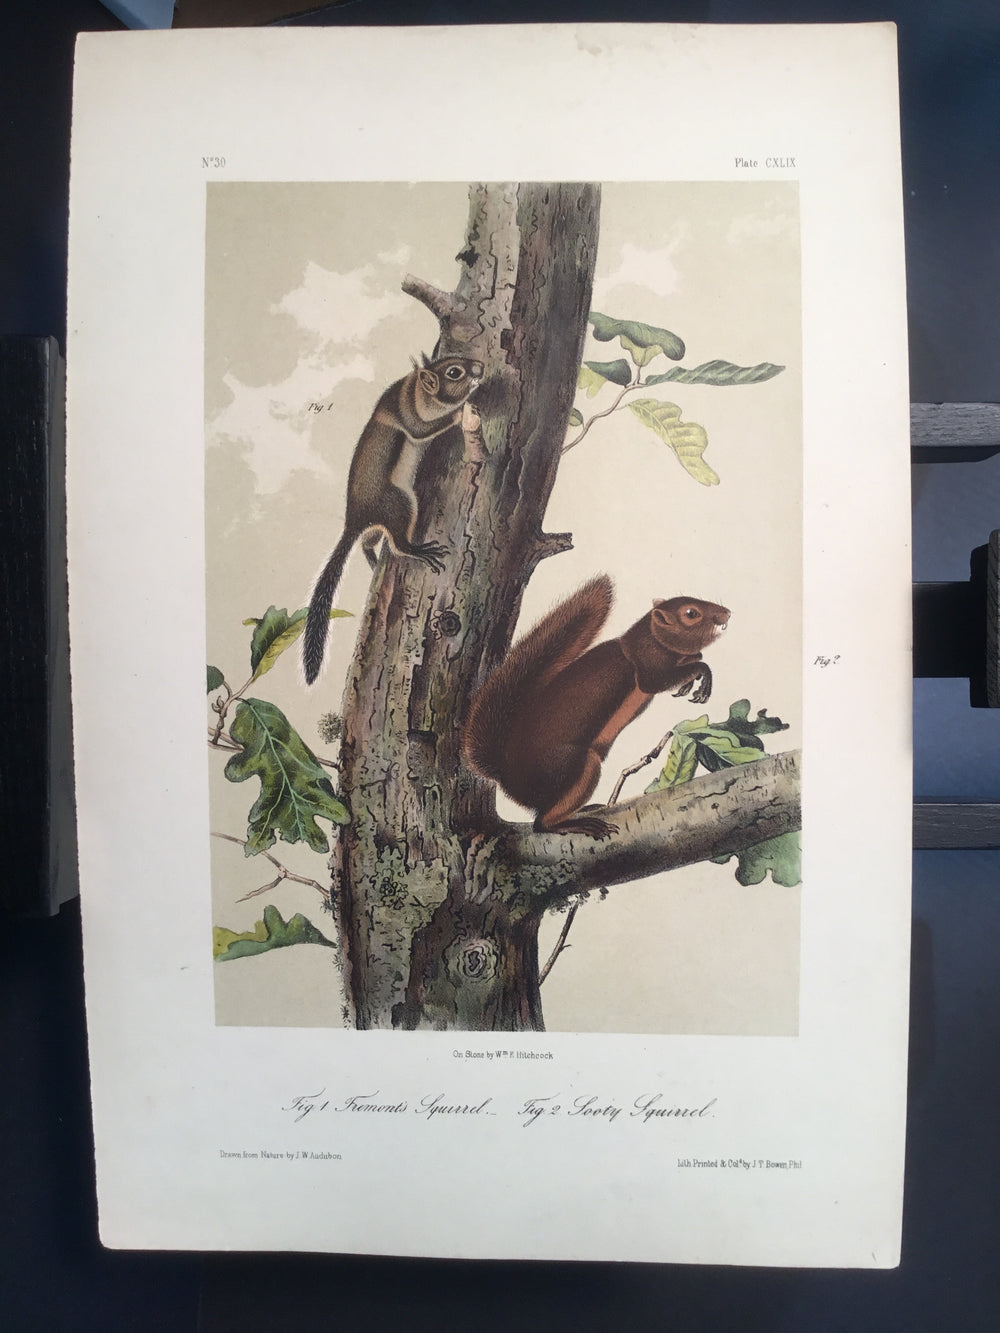 Lord-Hopkins Collection - Sooty Squirrel